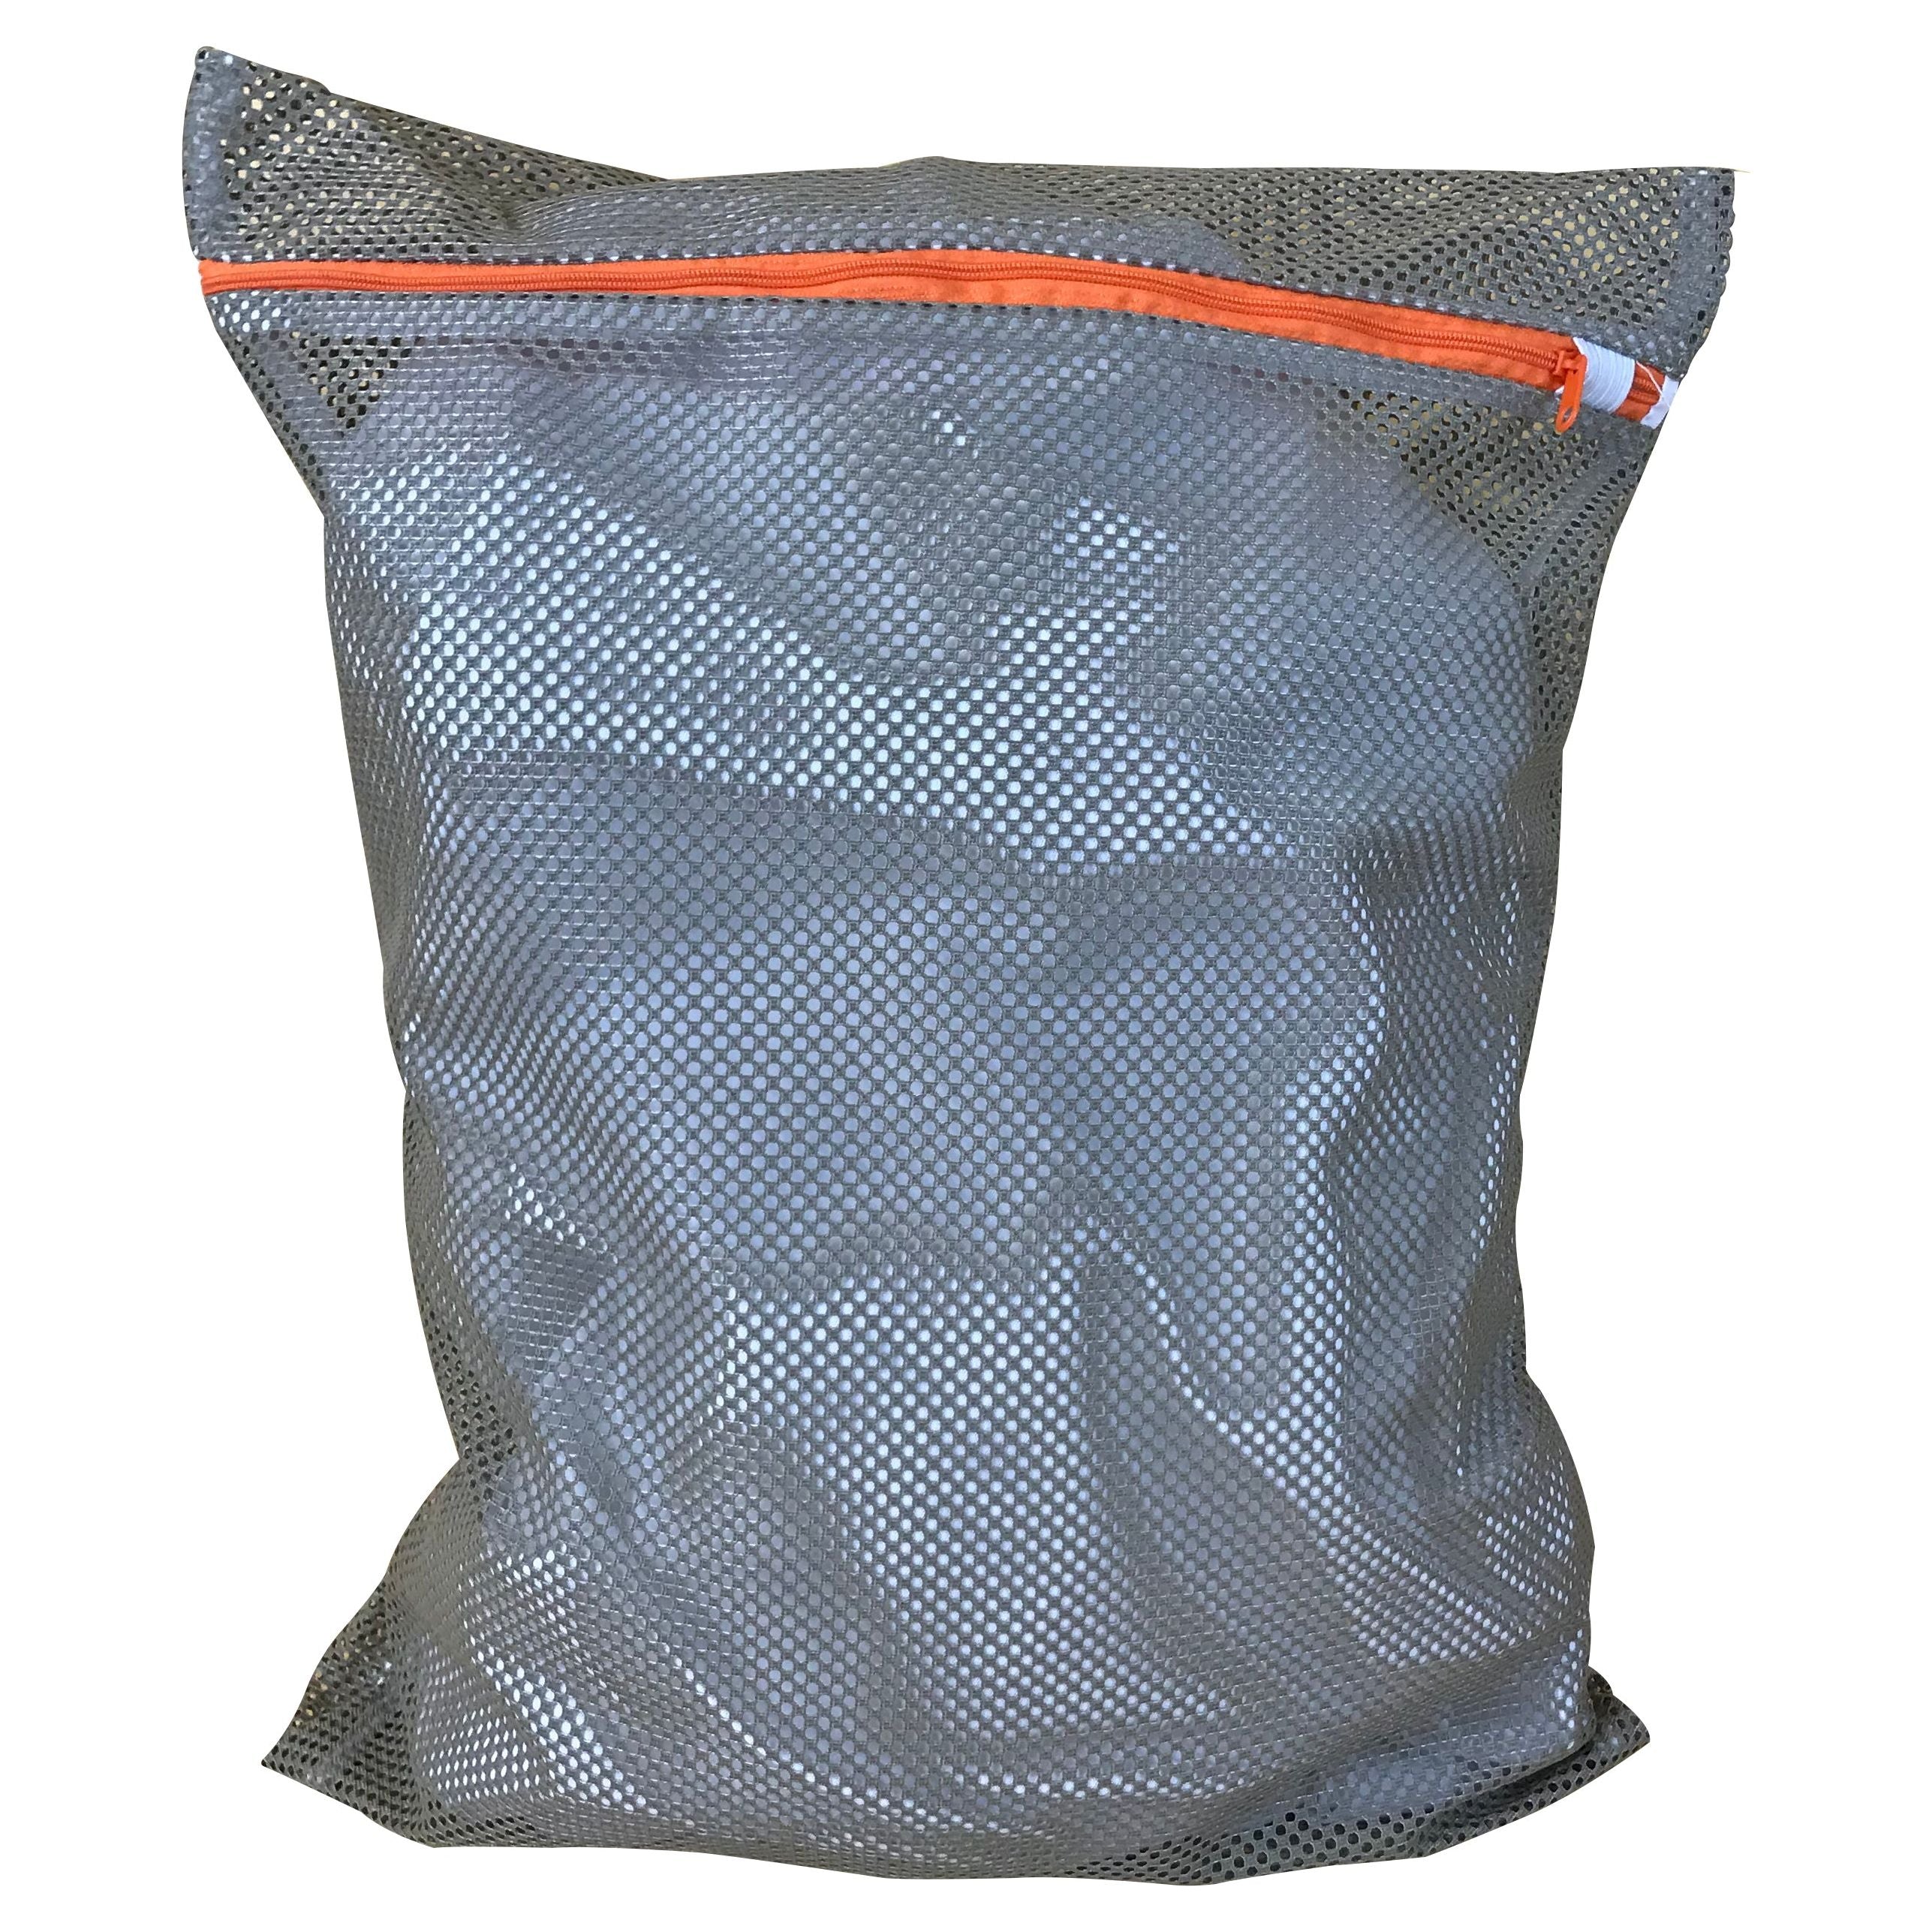 17" x 21 " Heavy Mesh Bags with Orange zipper, Color-Beige,  50 pieces/box, Sold by the Box, Price for 1 box $62.50